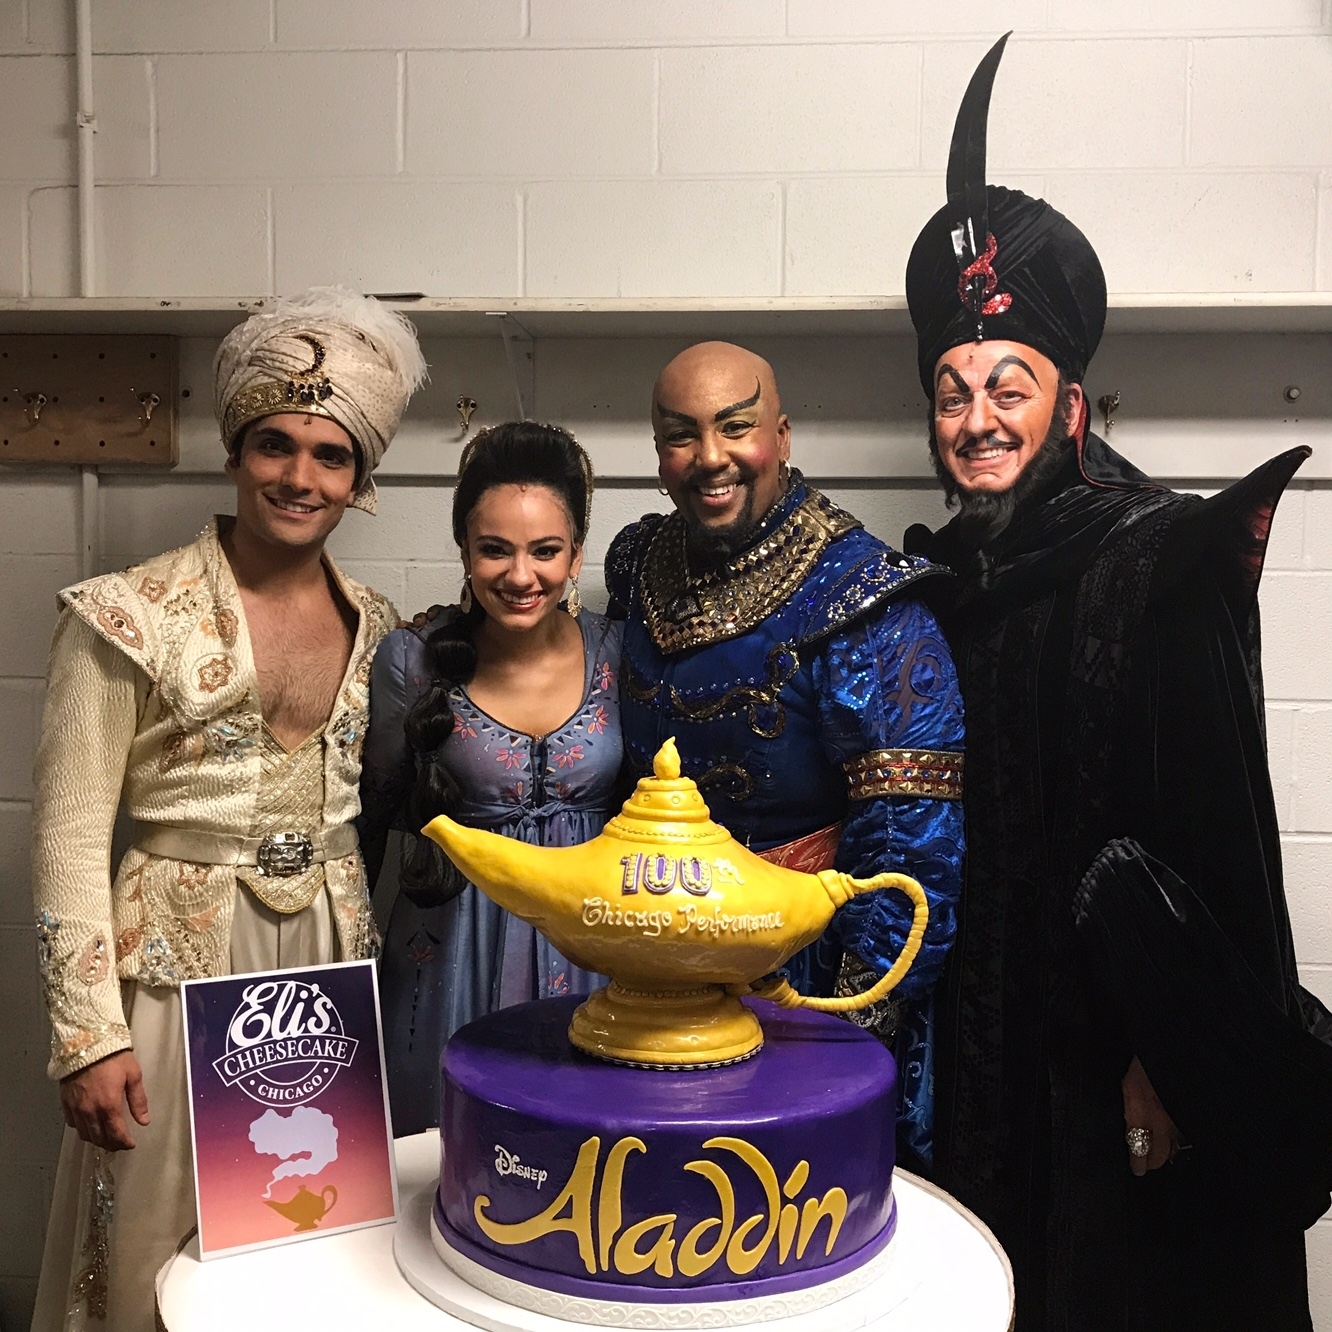 Disney's ALADDIN North American Tour Celebrates 100 Performances in Chicago 2 The cast of Disney's ALADDIN North American Tour celebrated 100 performances on Friday, July 14 in Chicago at Broadway In Chicago's Cadillac Palace Theatre, 151 W. Randolph.  Disney's Aladdin plays through Sep. 10, 2017 at the Cadillac Palace Theatre for the Chicago engagement. 